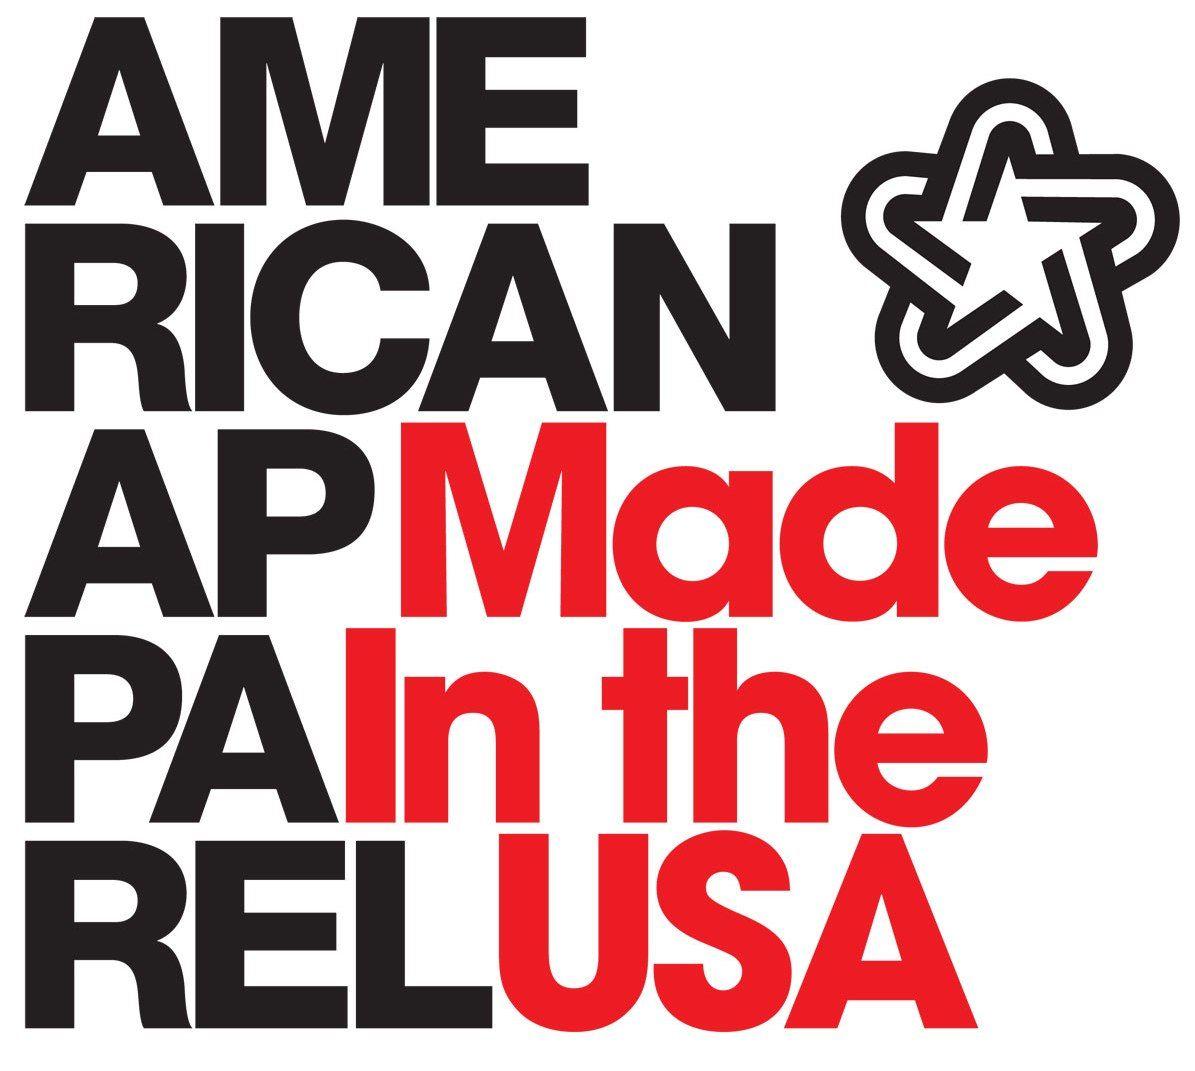 American Apparel Logo - American Apparel: Too Thin and Too Sexy? | UMKC Women's Center